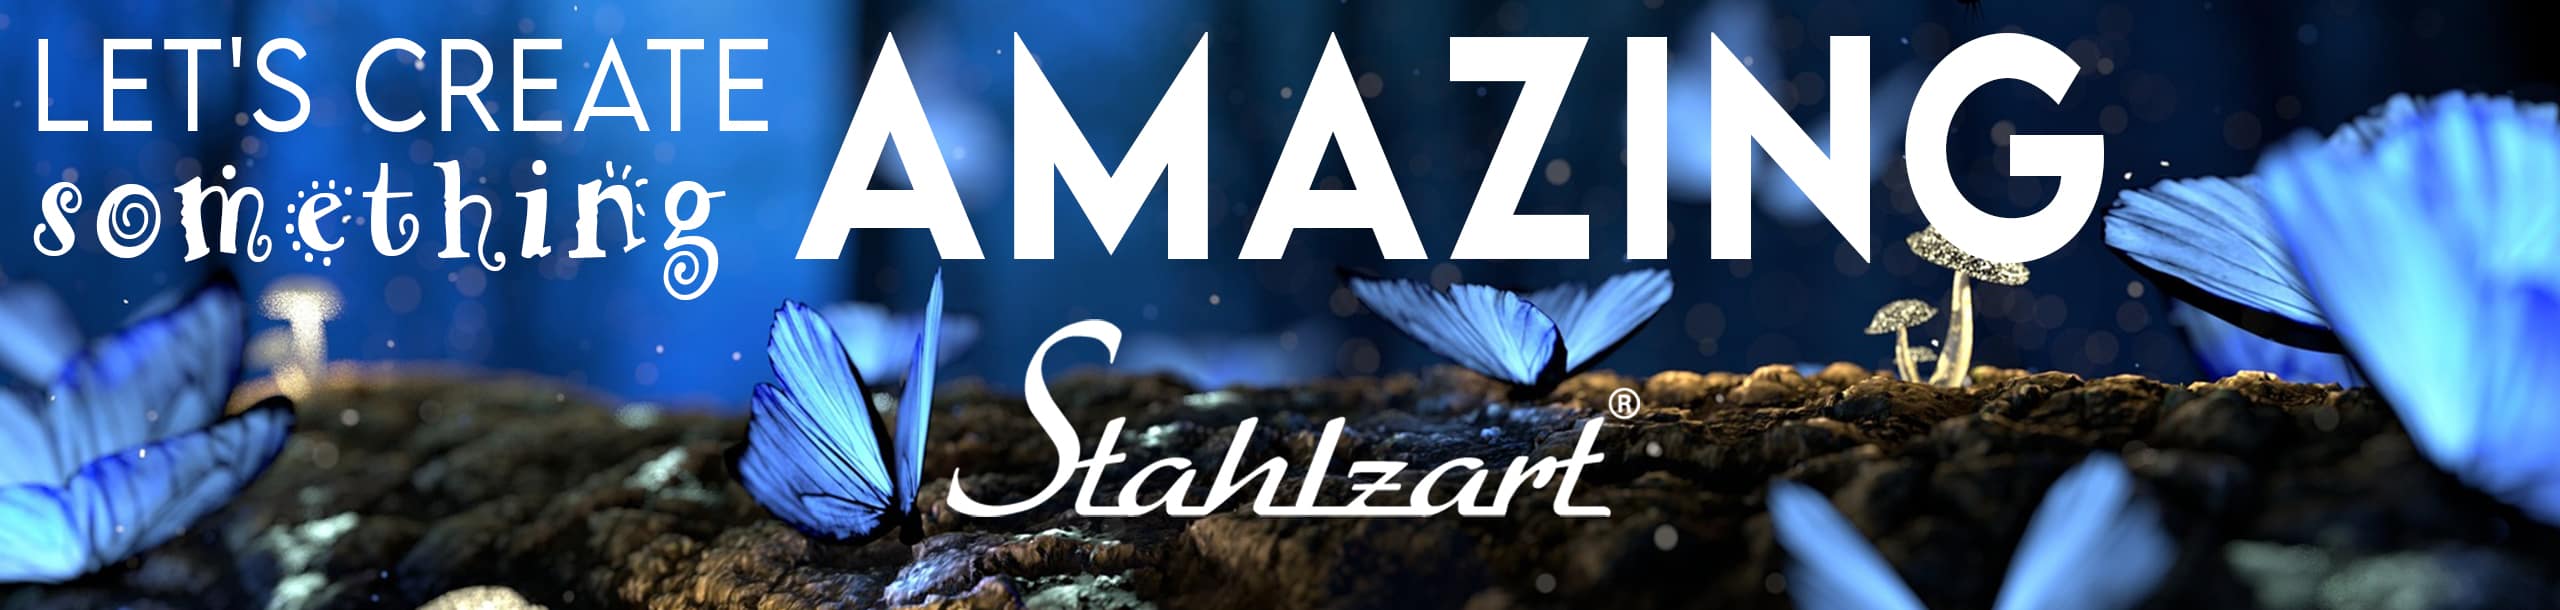 stahlzart-kontakt-contact-lets-create-something-amazing-white-font-butterfly-fantasy-background-architektur-interior-produkte-made-in-germany